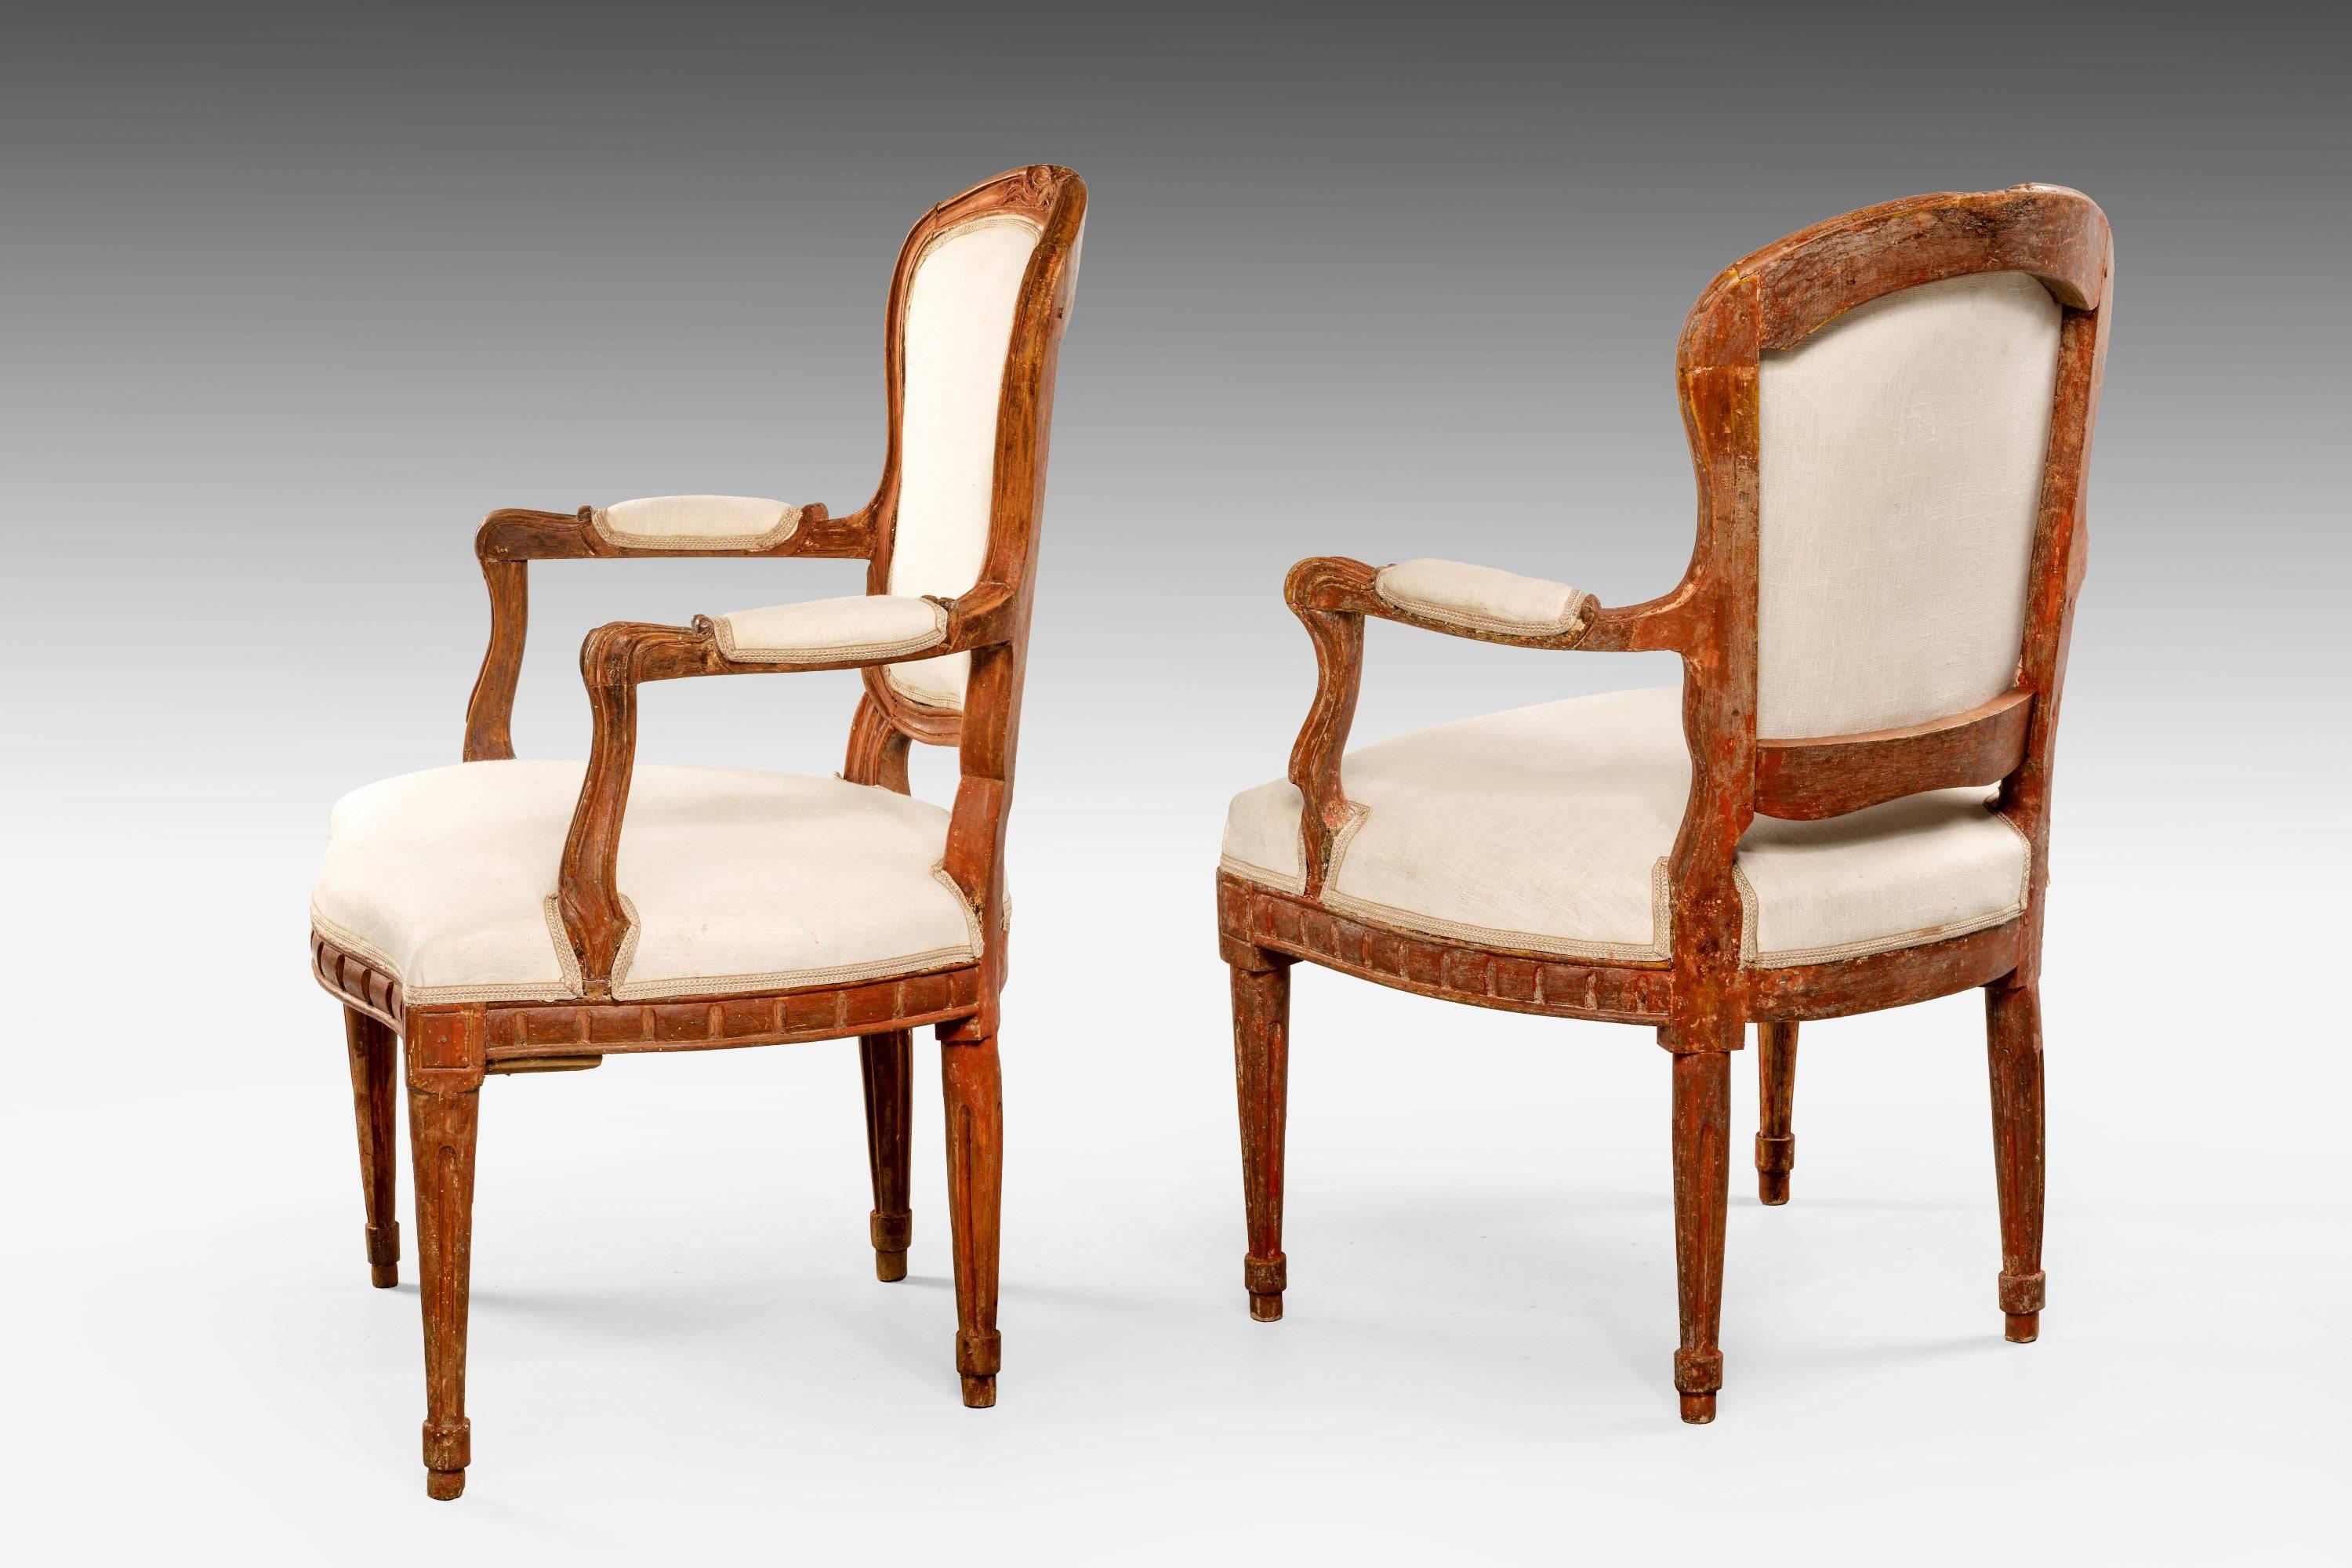 A pair of 18th century beech Louis XVI chairs. The serpentine front rail with unusual rectangular section carving, the whole now somewhat tired. RR.